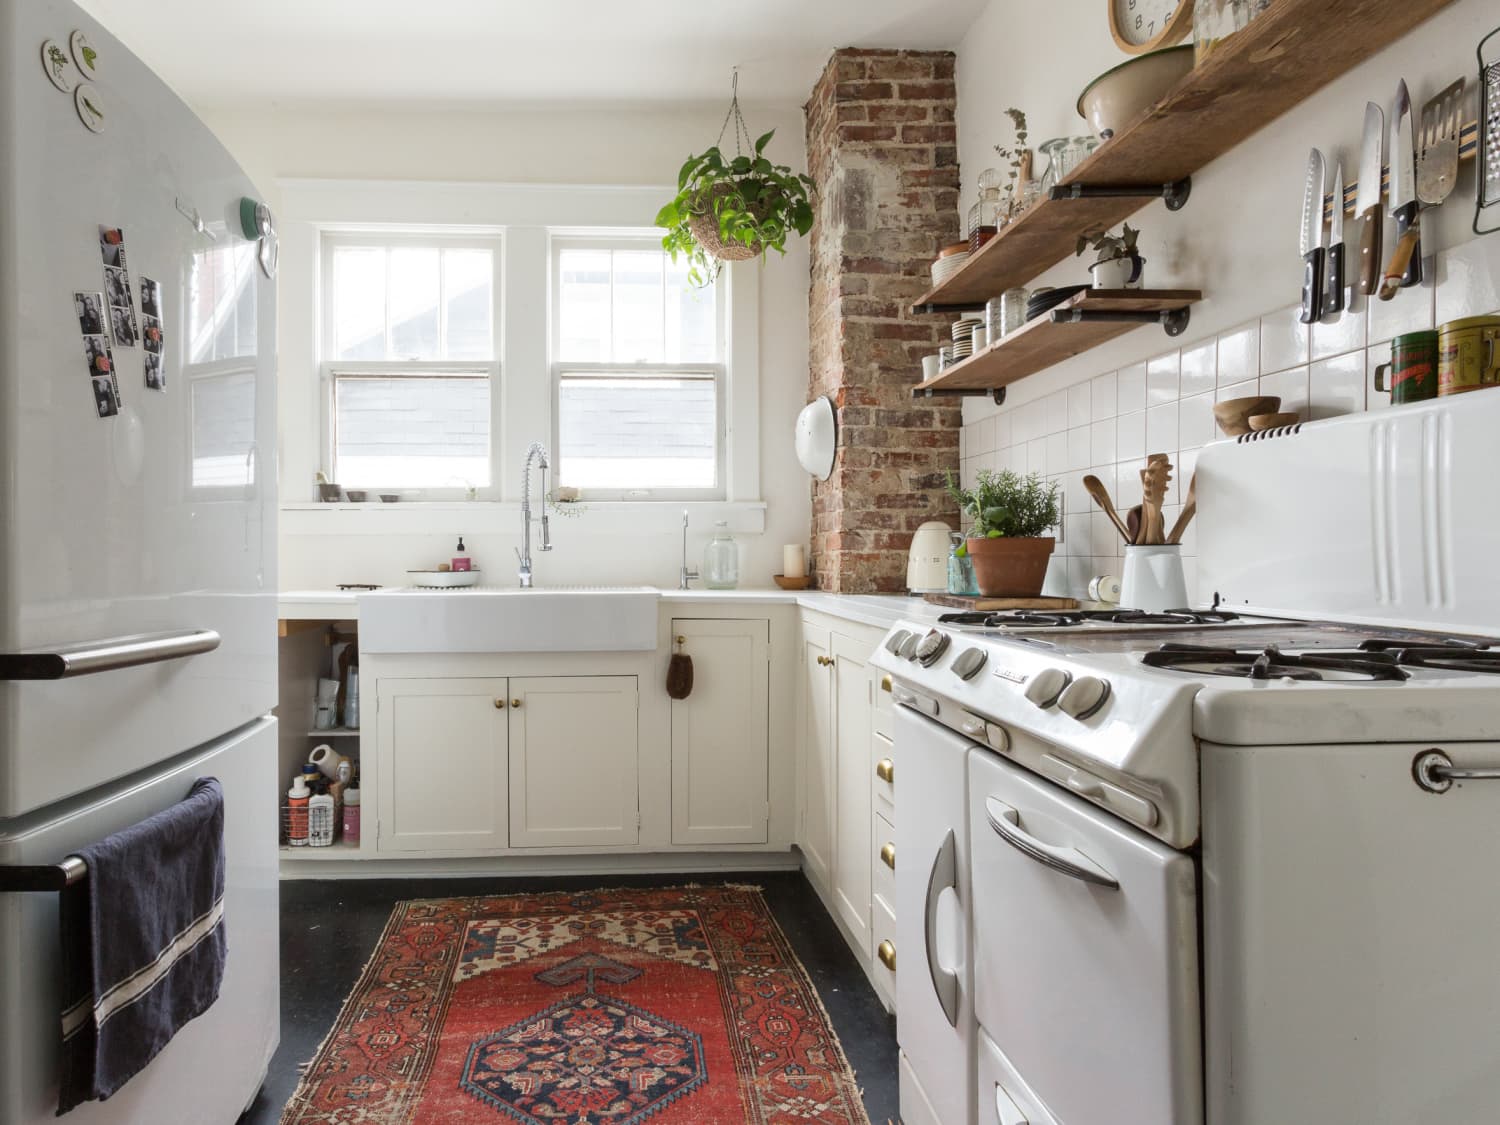 What is important to look for when picking rugs for your kitchen? | The ...